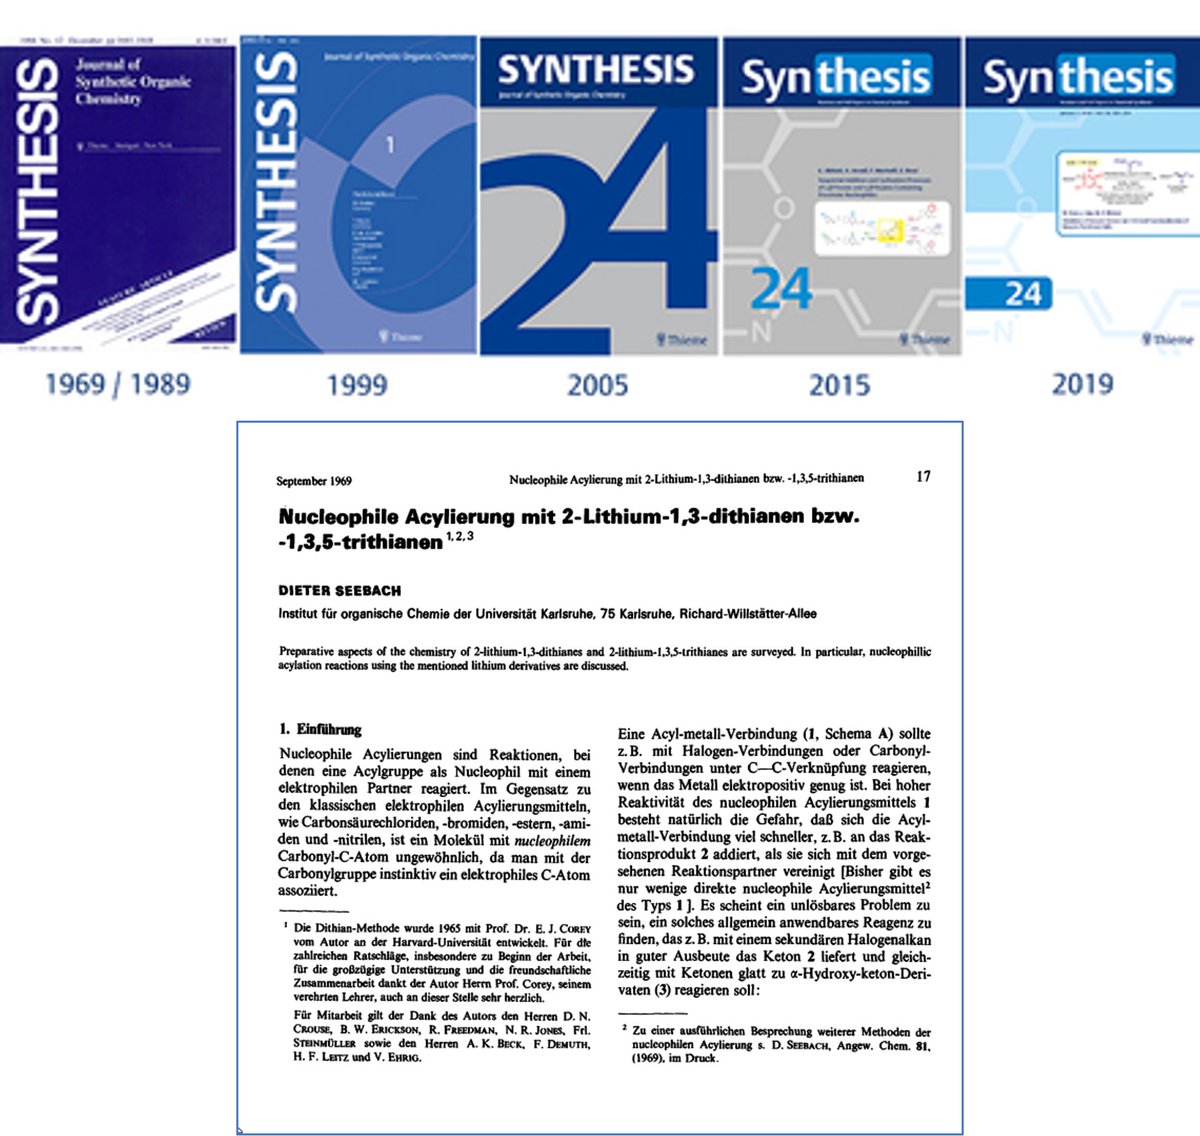 🌟 SYNTHESIS was founded in 1969 by Thieme @ThiemeGruppe and the editors Gottfried Schill, Manfred Schlosser, George Sosnovsky and Herbert Ziegler🌟 The first issue contained a review by Dieter Seebach on nucleophilic #acylation, known as #Umpolung 😍 👉brnw.ch/21wJVjK